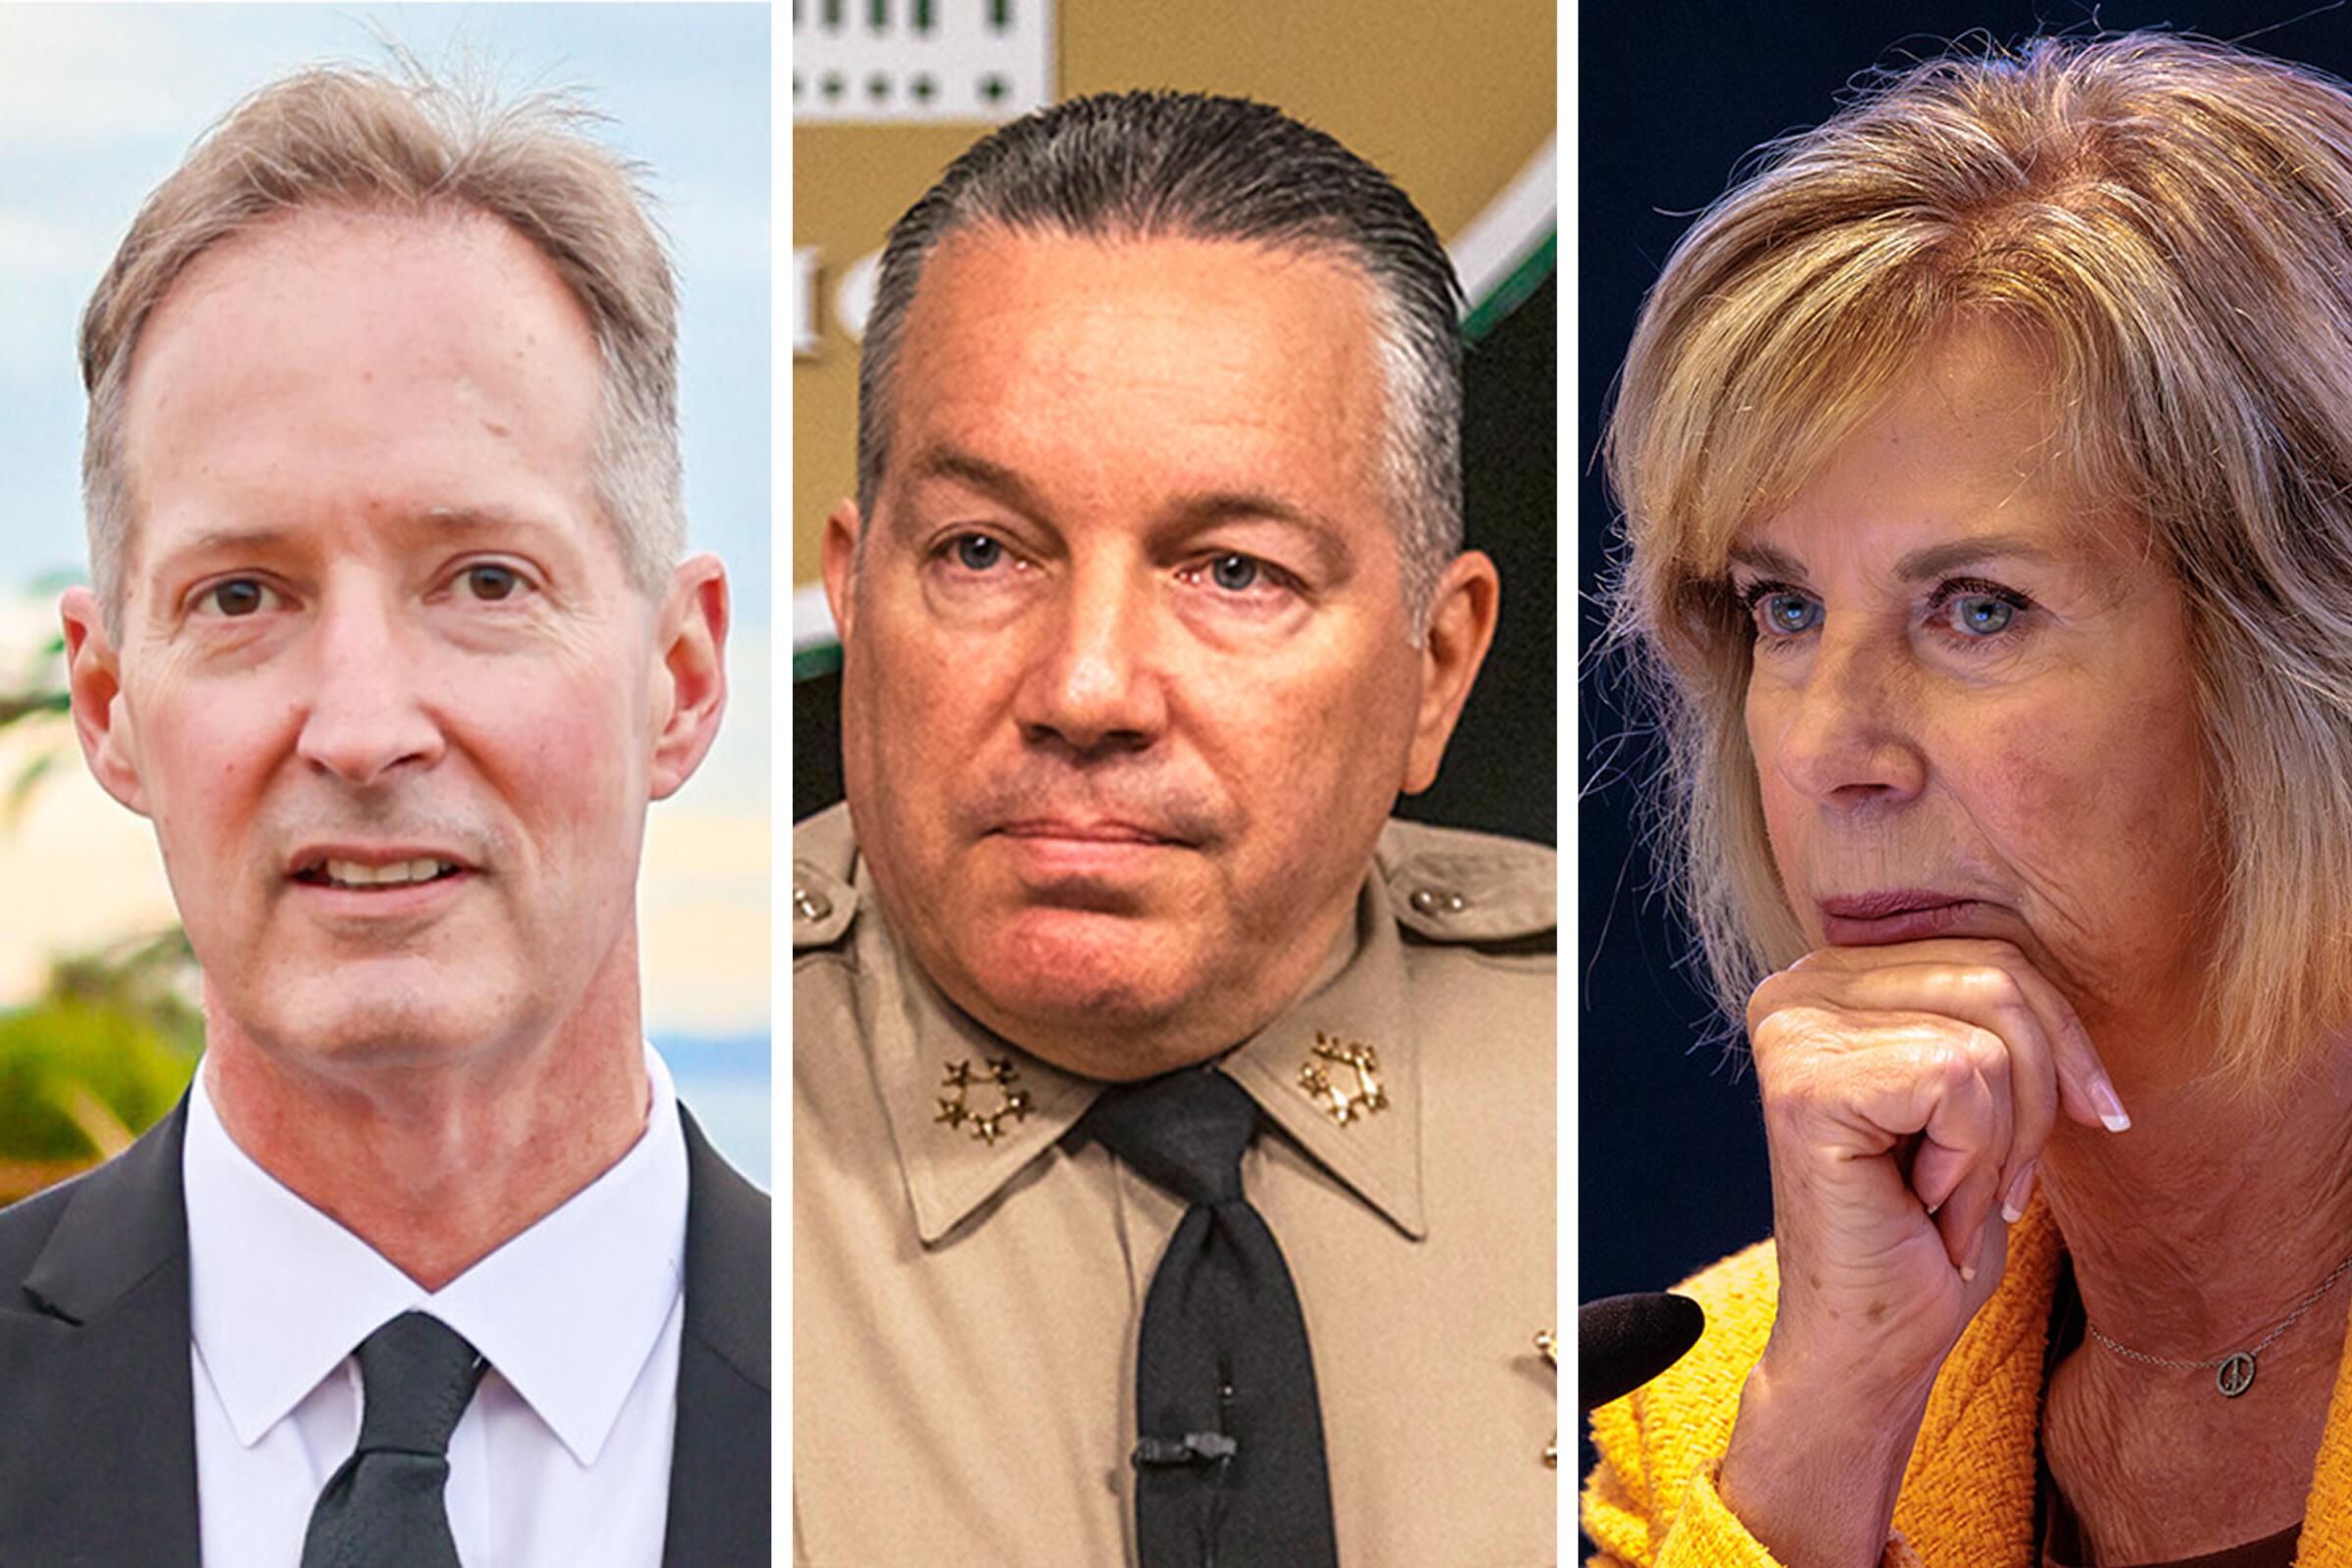 L.A. County's 4th District supervisor race election voter guide